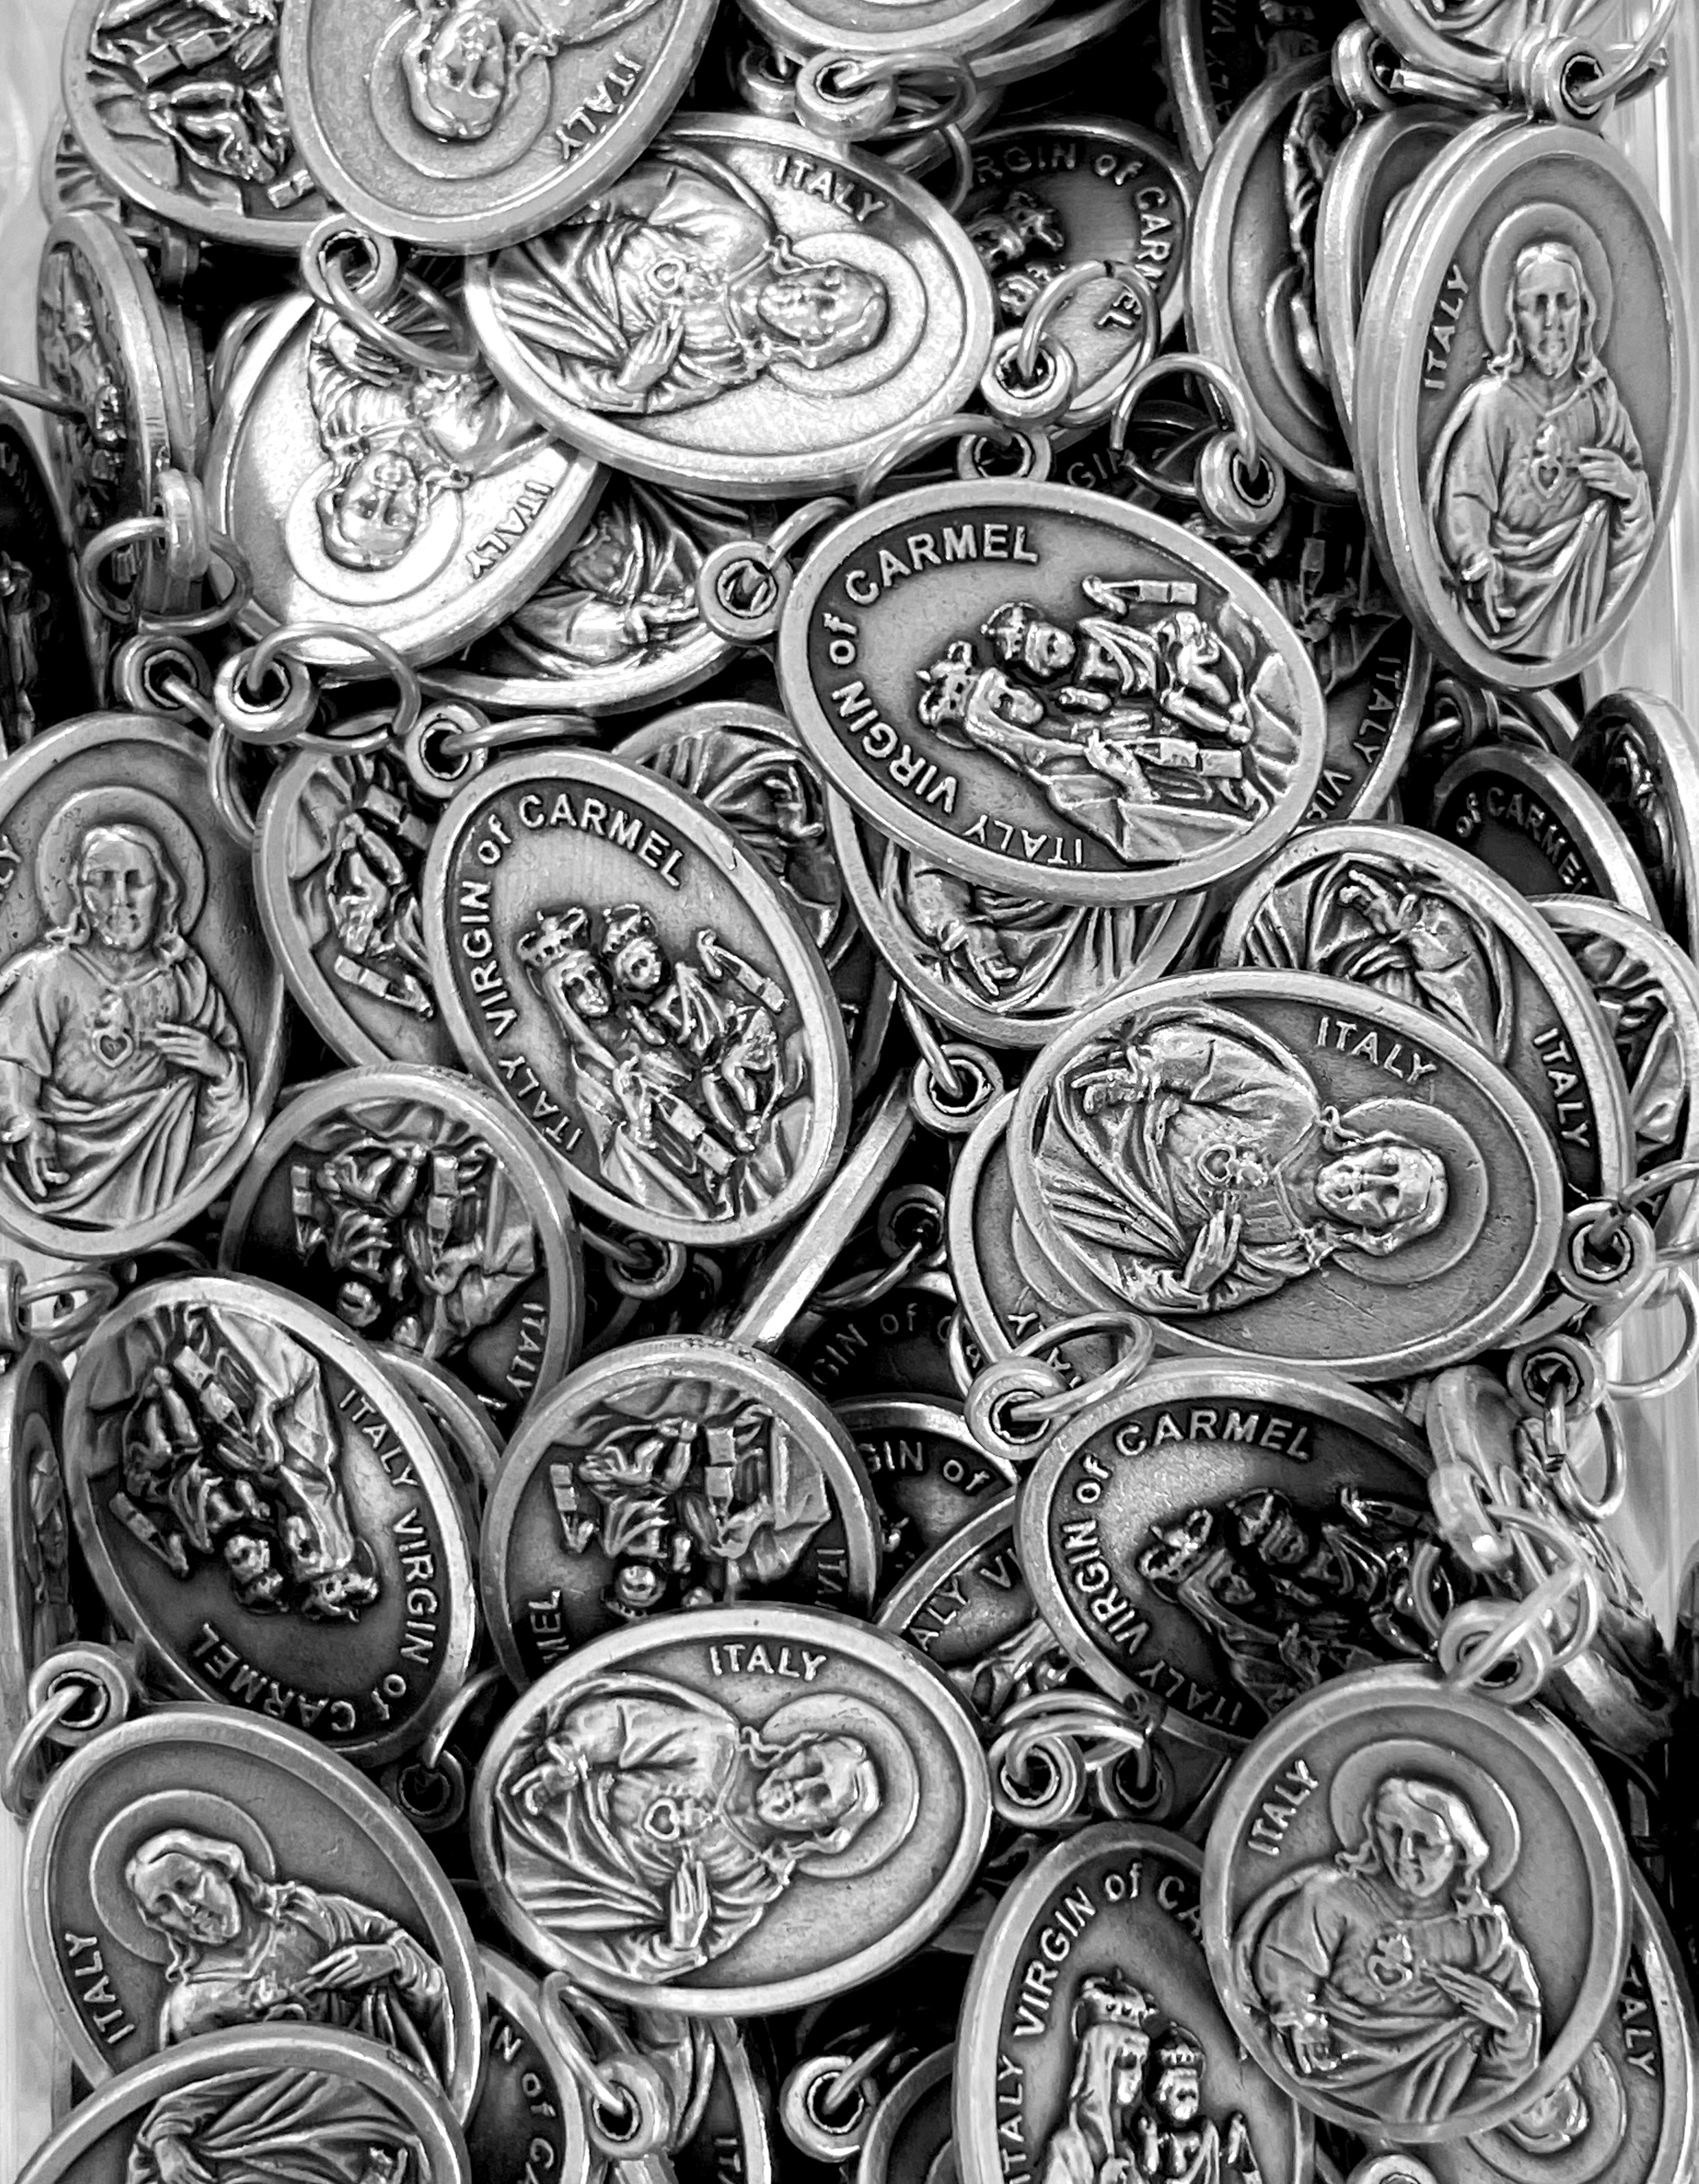 Pack of 12 Saints Medals in oxidized silver made in Italy 1.0" x 0.7"